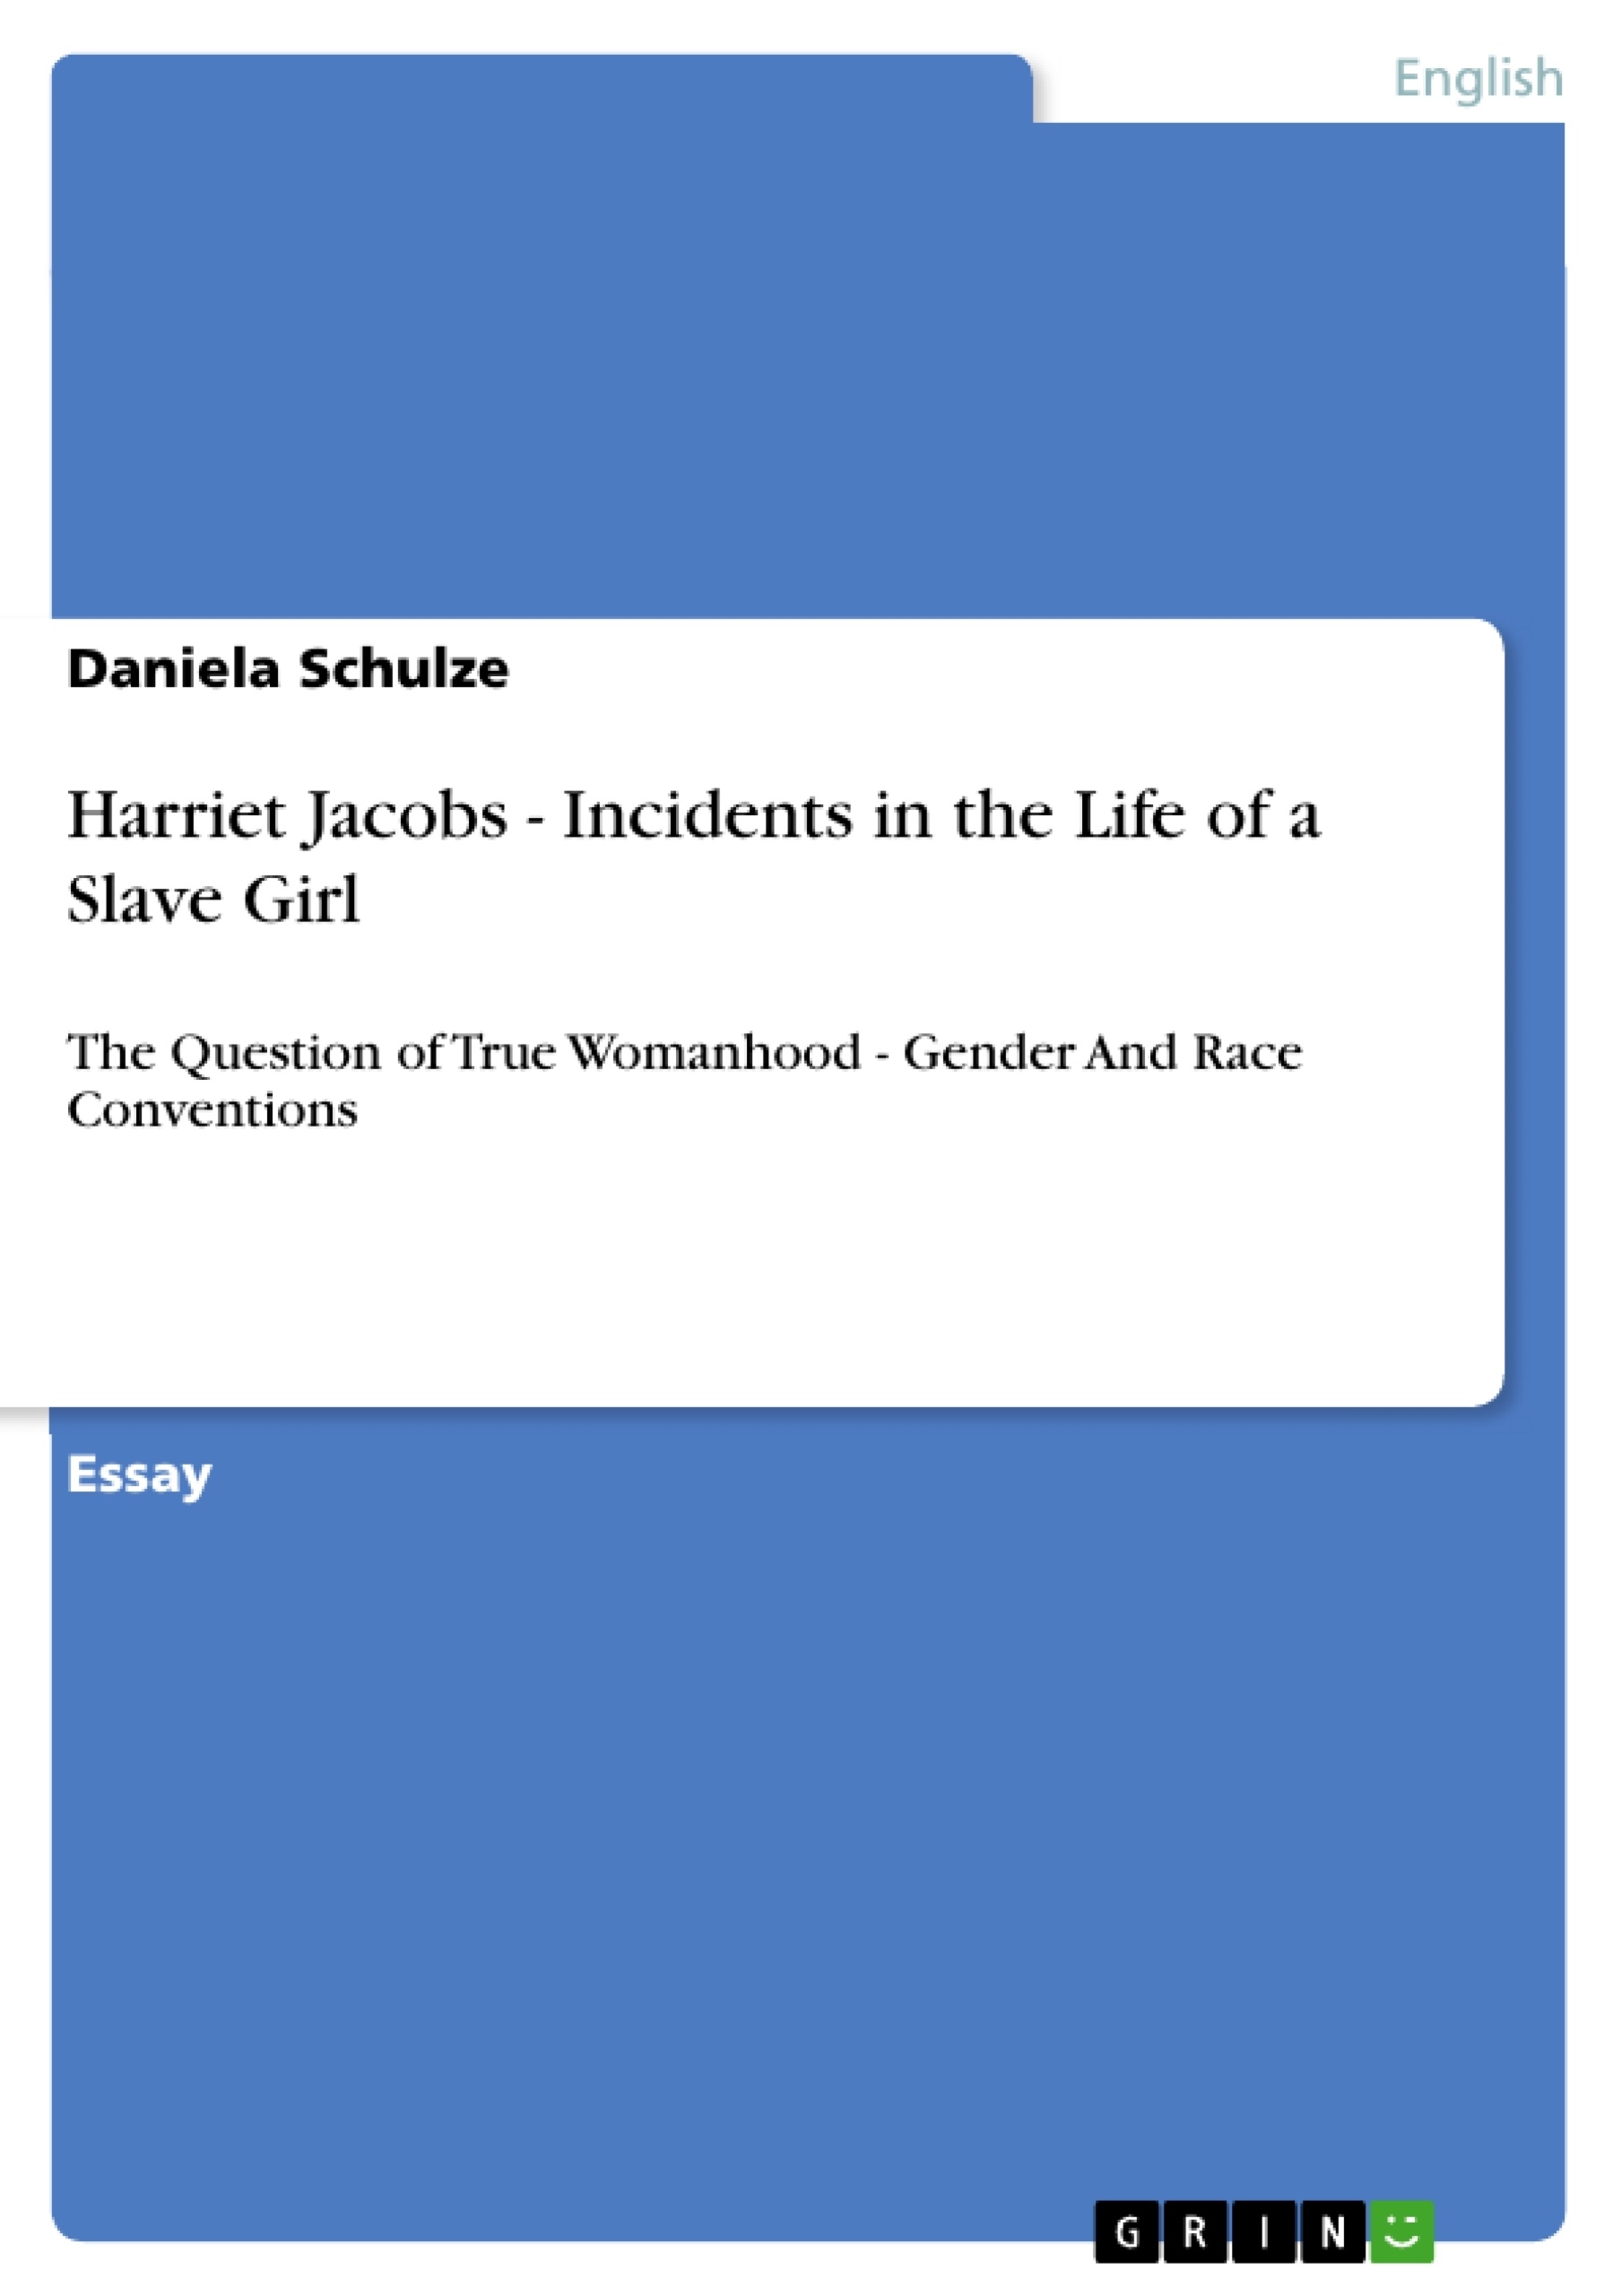 Title: Harriet Jacobs - Incidents in the Life of a Slave Girl